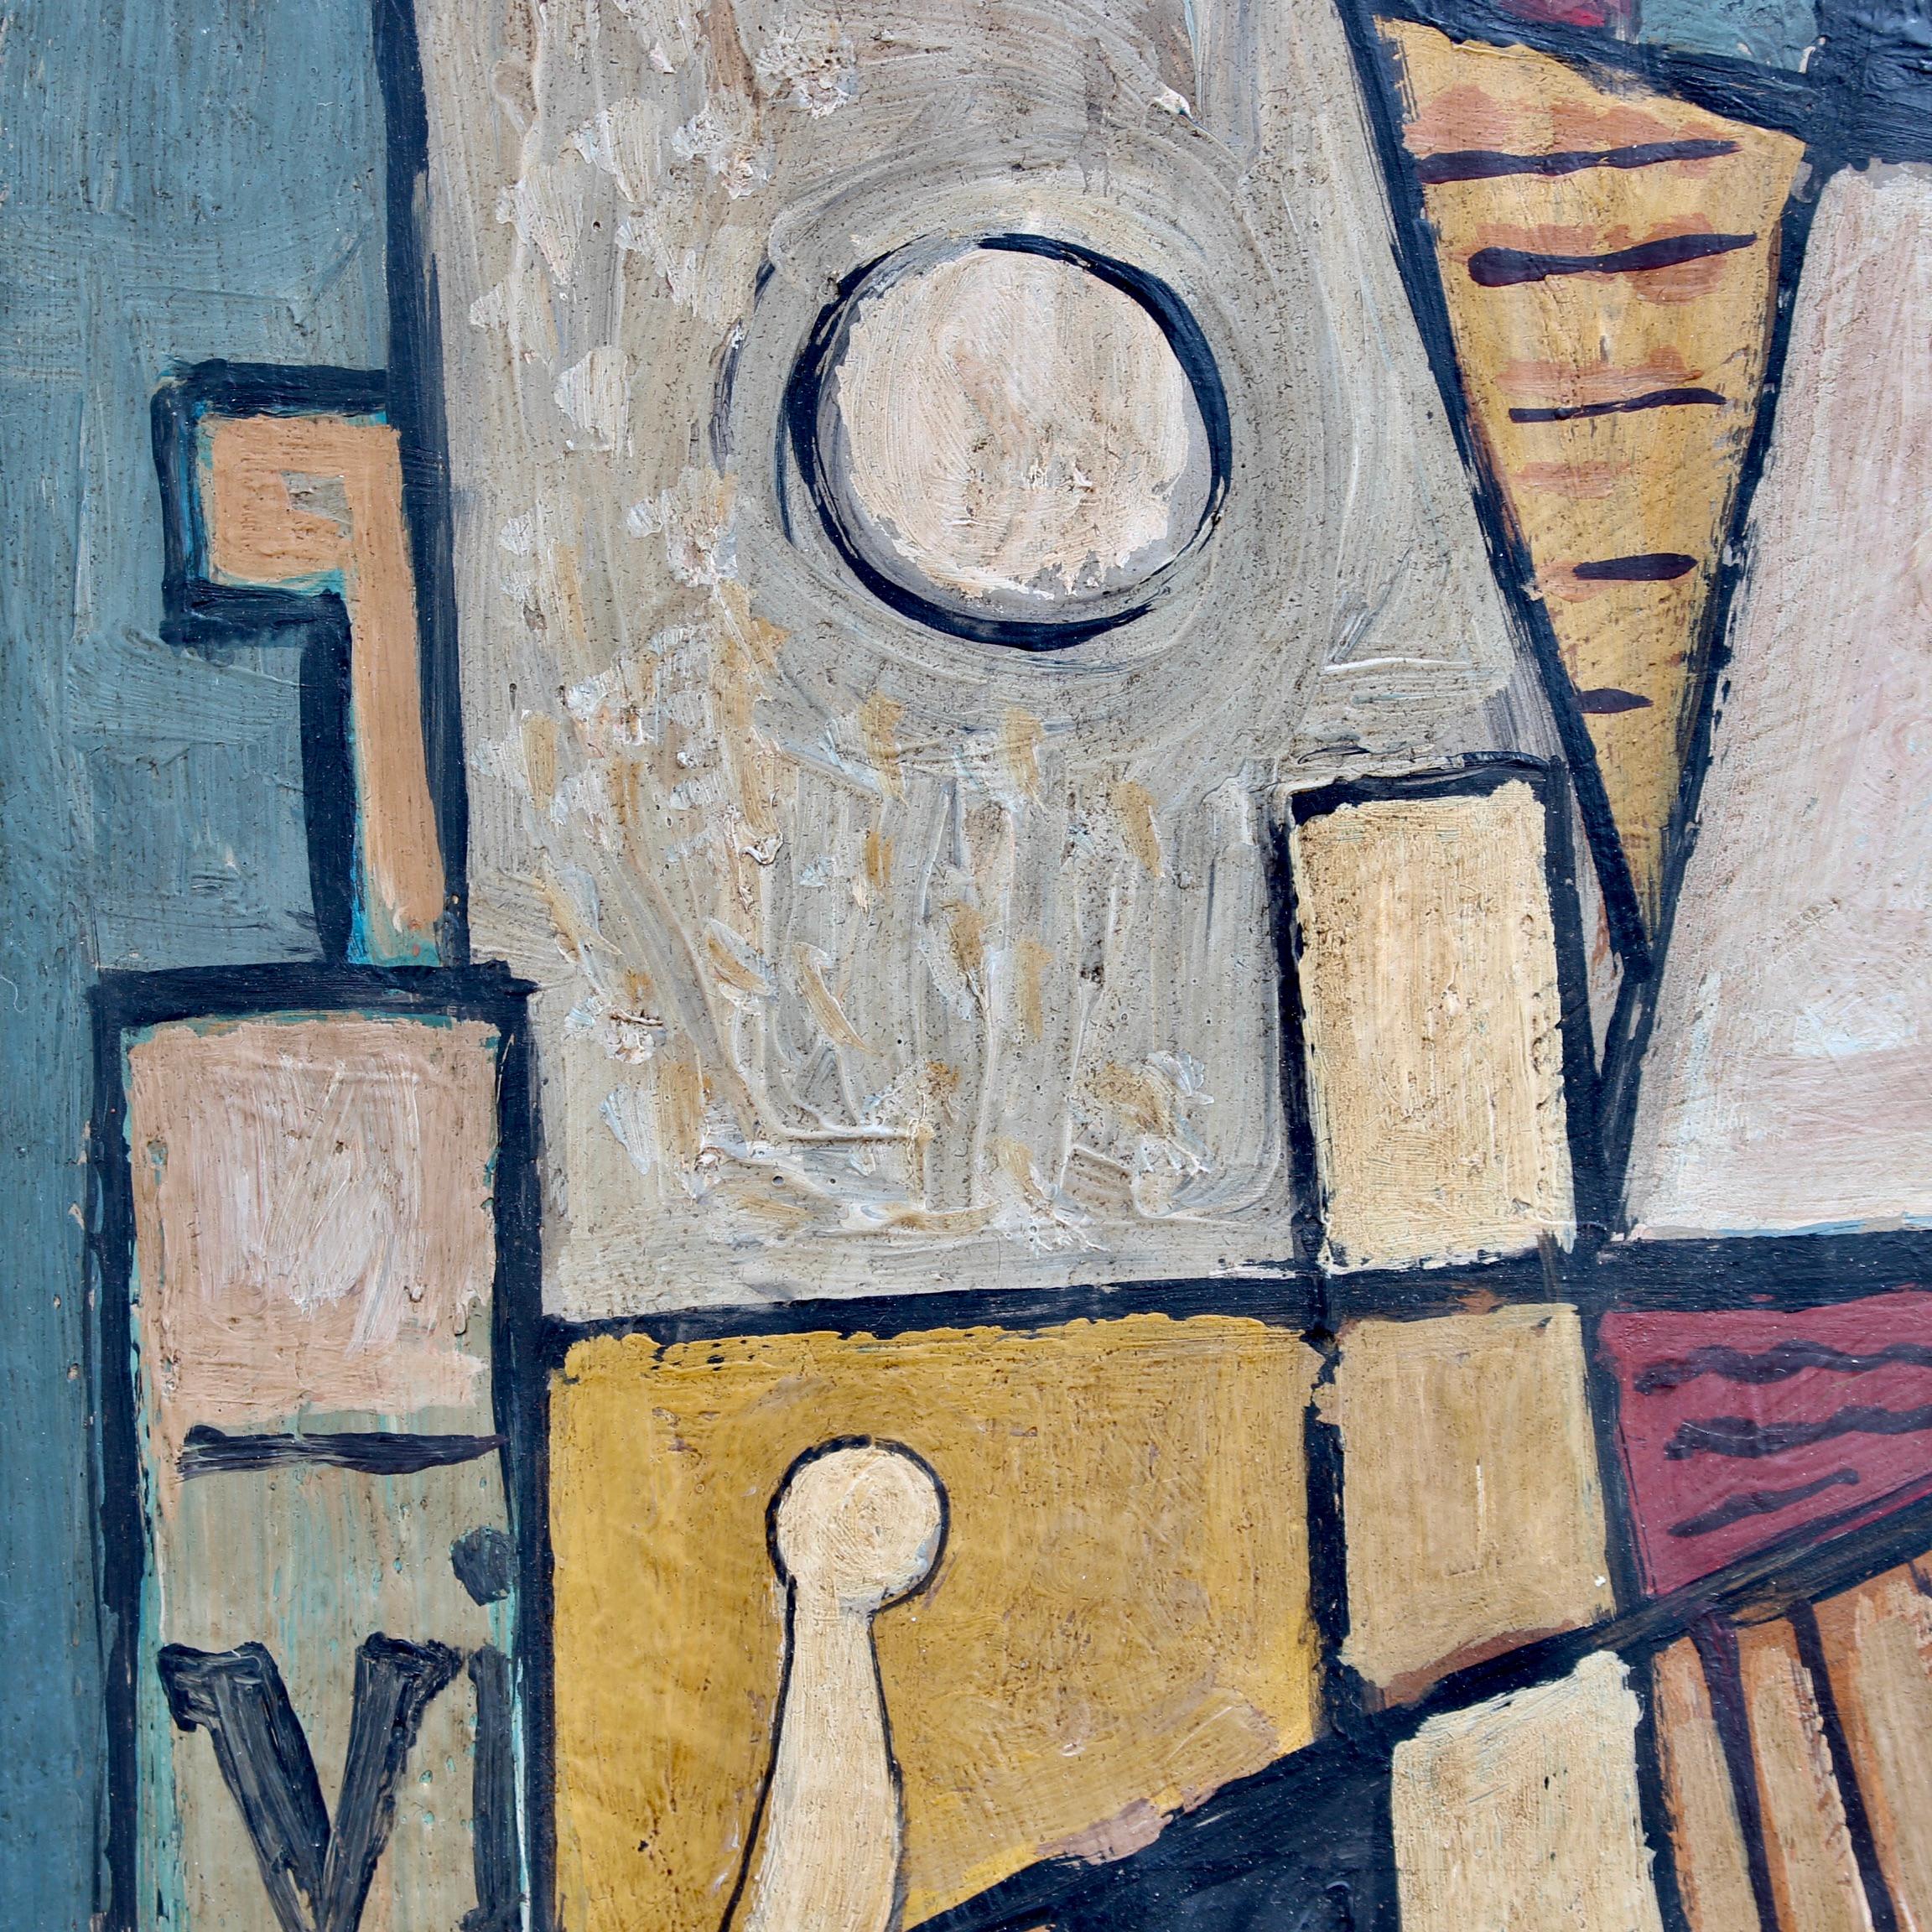 'Still Life with Guitar, Carafe and Sheet Music', oil on board (circa 1960s), by Laval. This artwork is a cubist homage to one of the founders of the movement, Juan Gris (1887 - 1927). Cubism started with Braque (1882 - 1963) and Picasso (1891 -